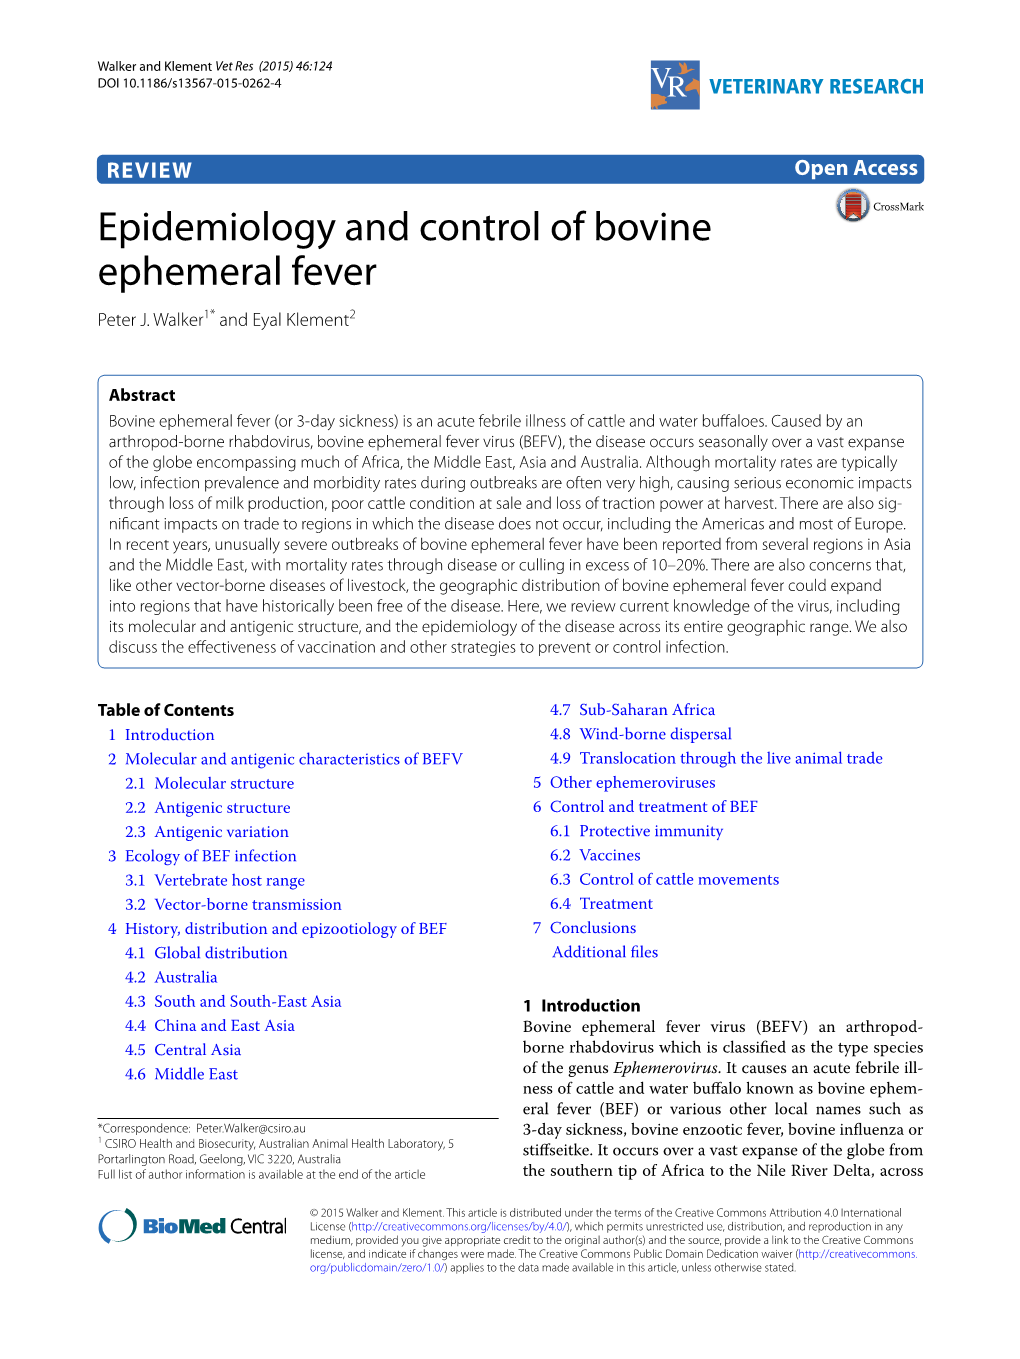 Epidemiology and Control of Bovine Ephemeral Fever Peter J